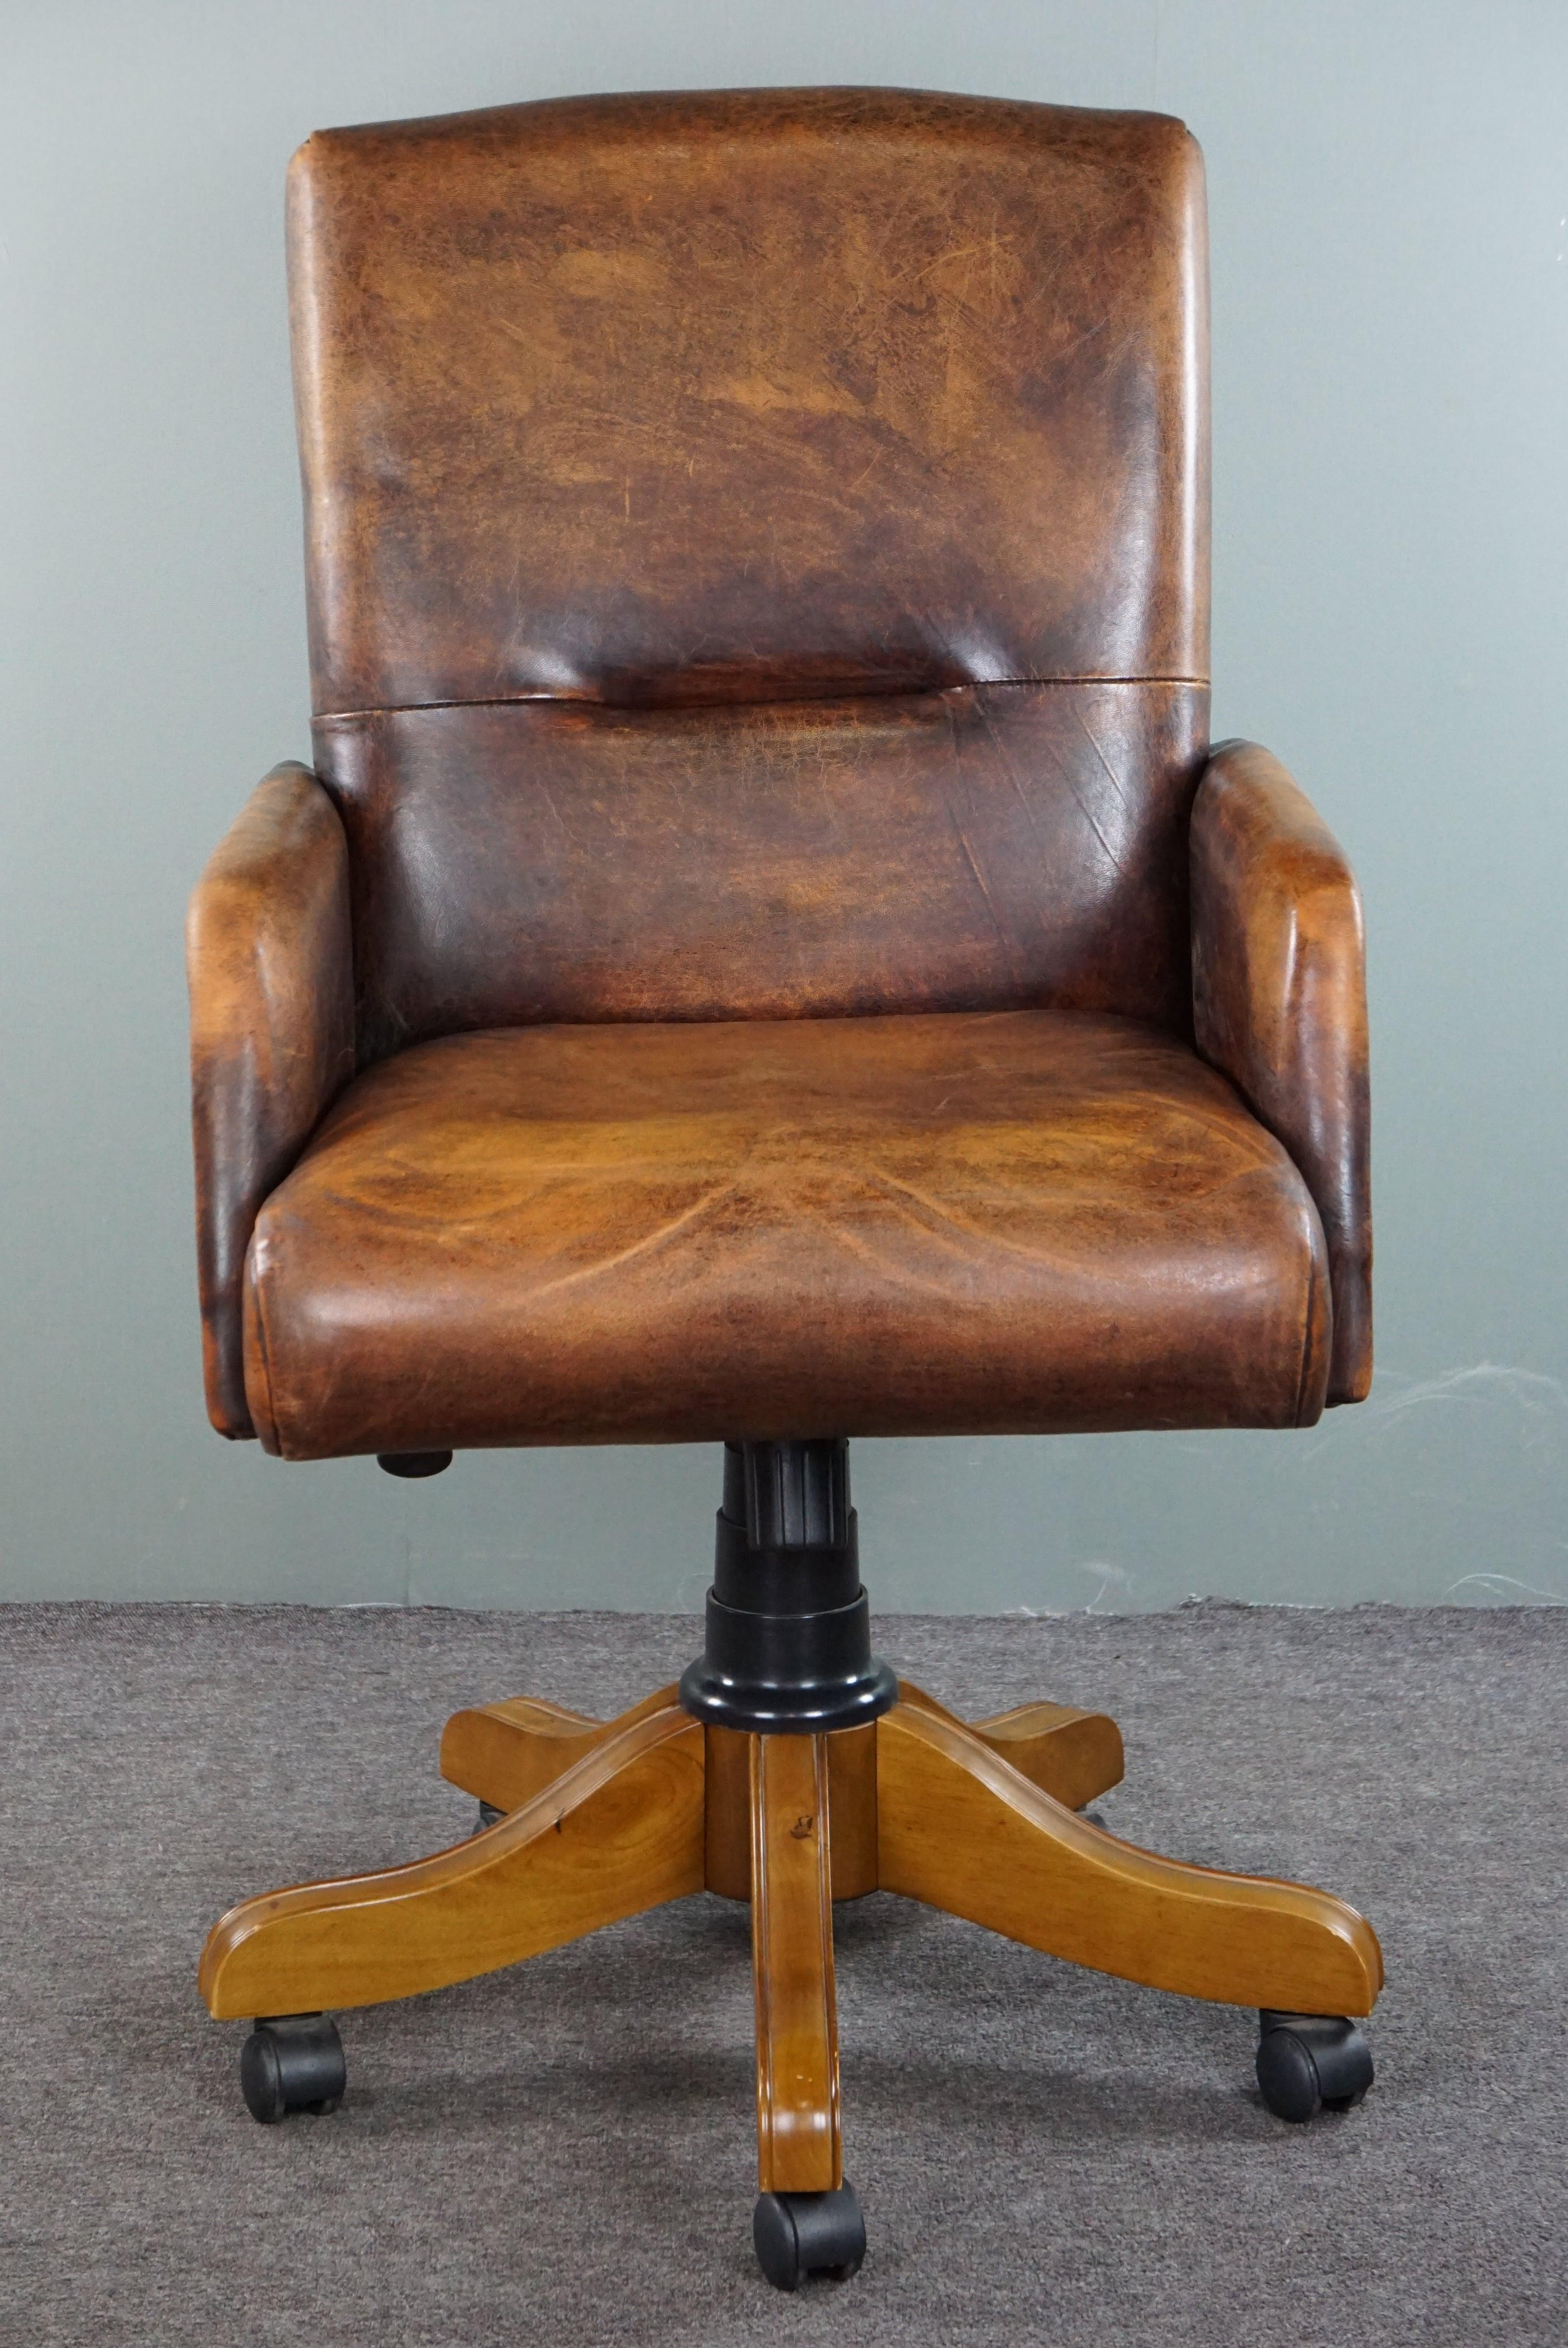 Offered is this adjustable sheepskin leather office chair in good condition, English style, with swivel and tilt function. 

Who wouldn't want this? We certainly do! Secretly, doesn't everyone dream of an English desk with a chair like